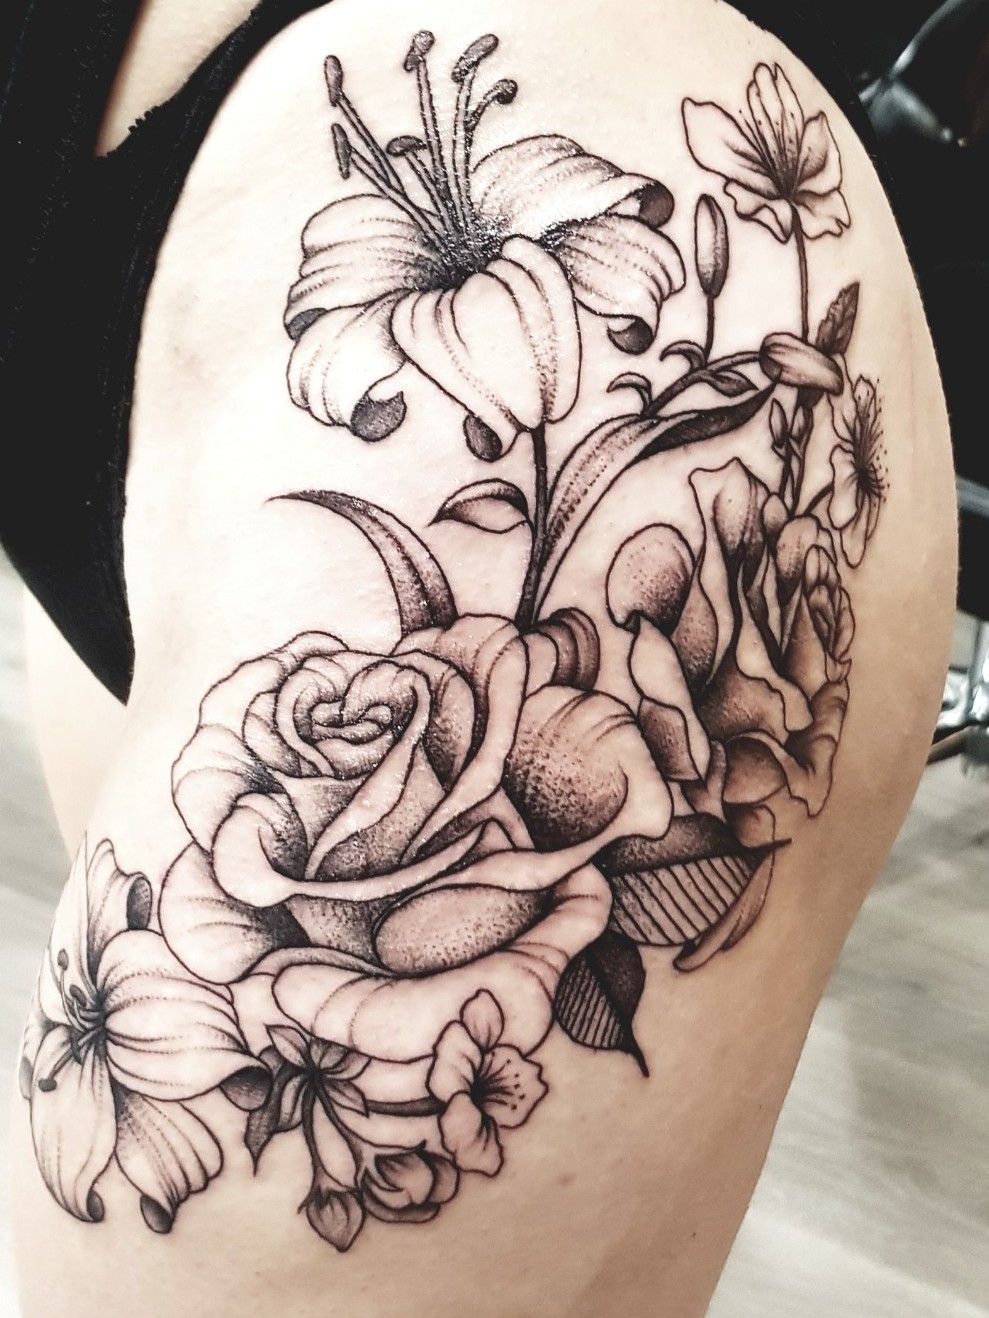 Buy Tattoo Design Floral A Digital Download Online in India  Etsy